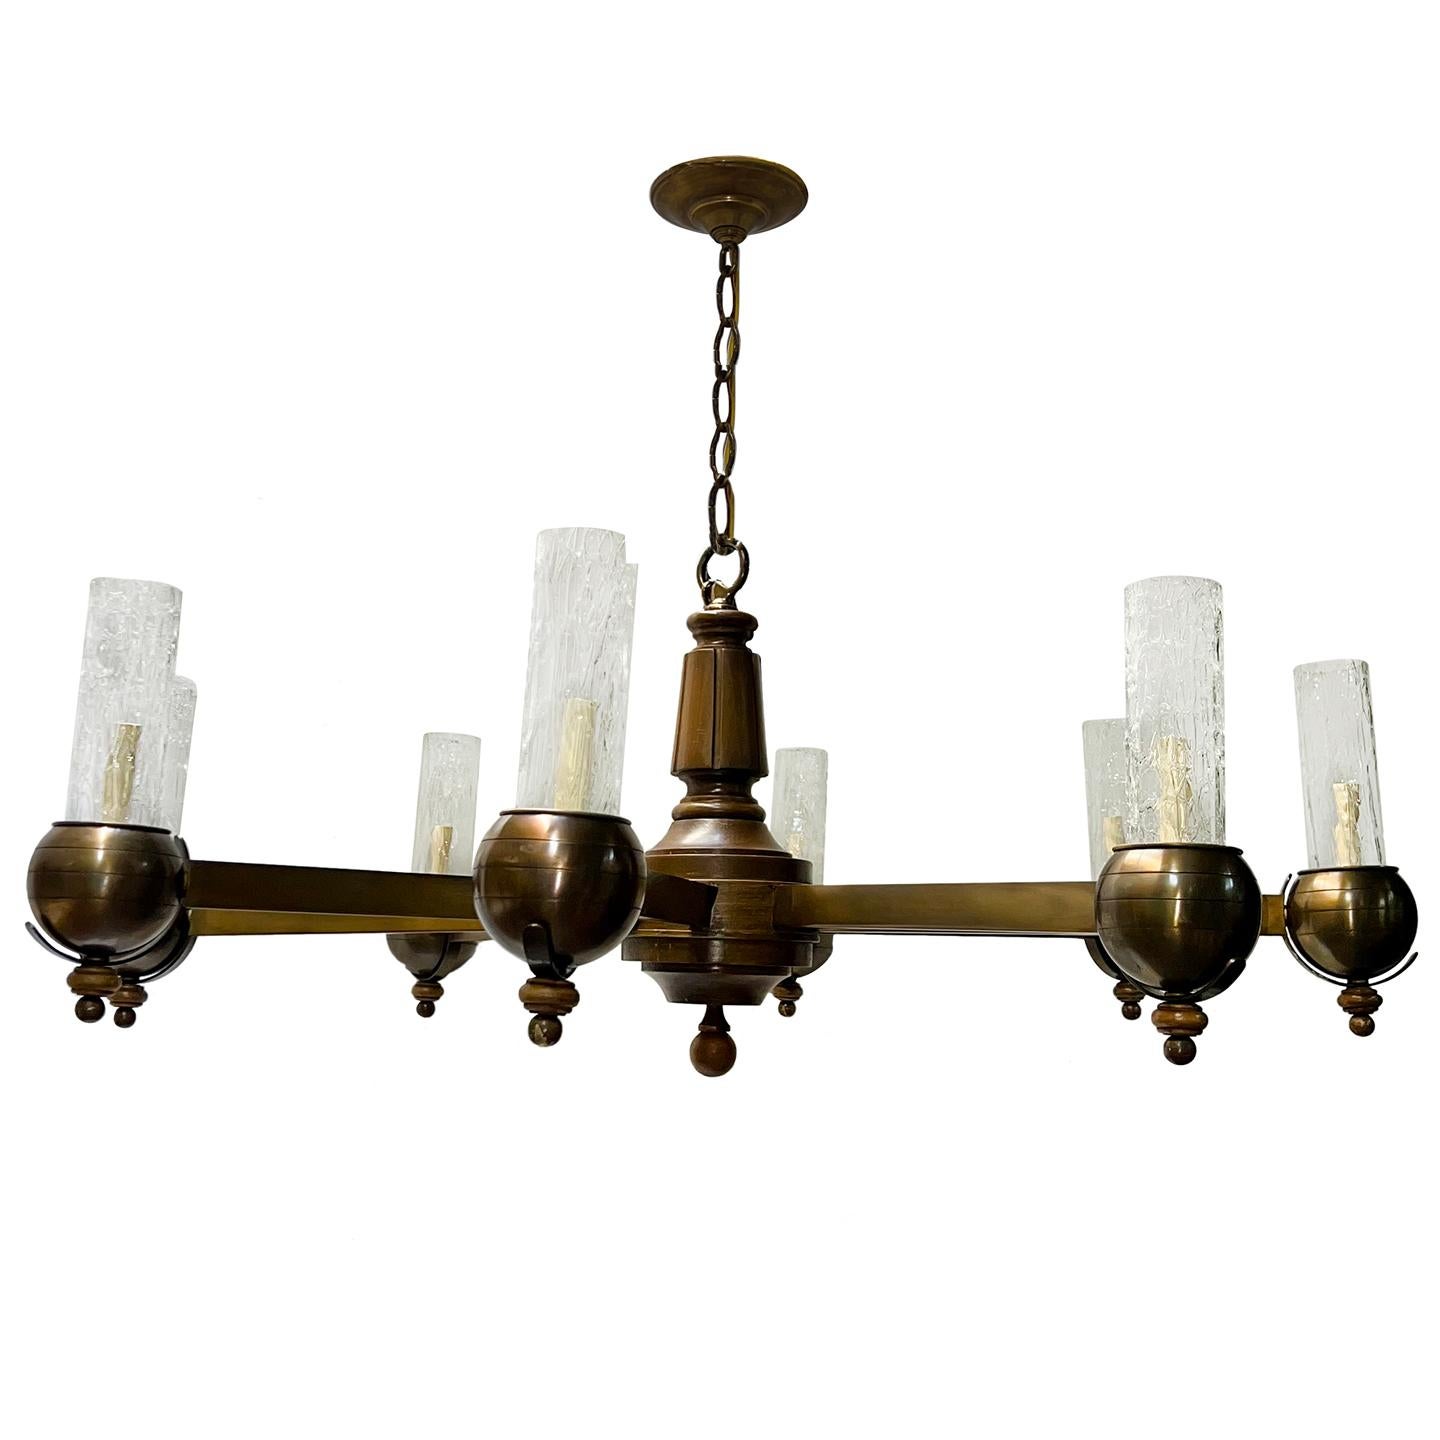 A circa 1950's Italian bronze and wood chandelier with glass insets and 8 lights.

Measurements:
Drop: 23